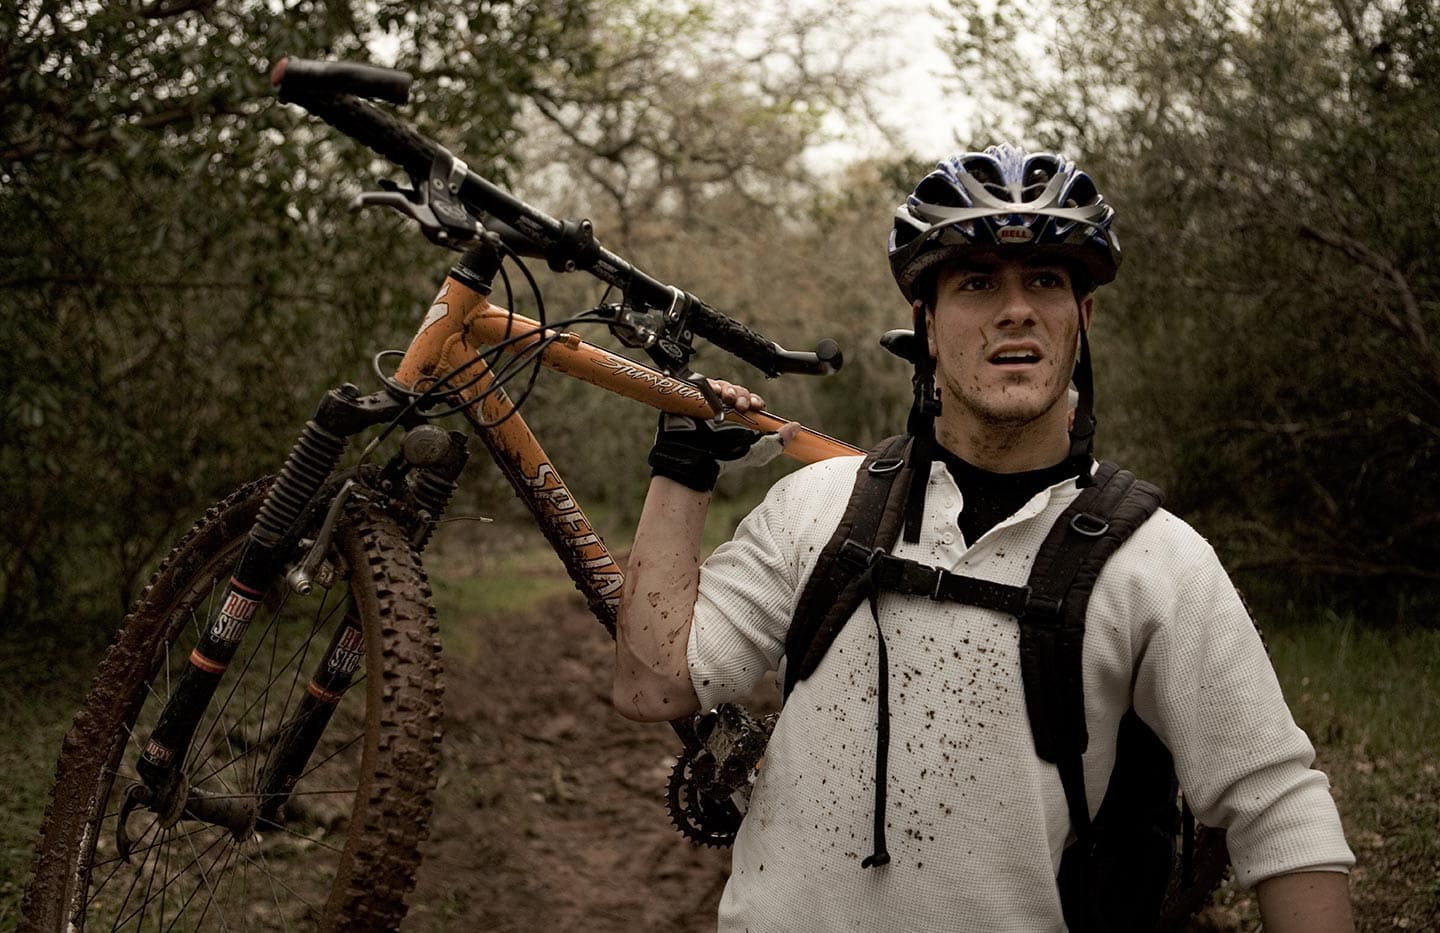 Image of Man in White Shirt with Biking Apparel Lifting Bike Behind Him Against Background of Forest